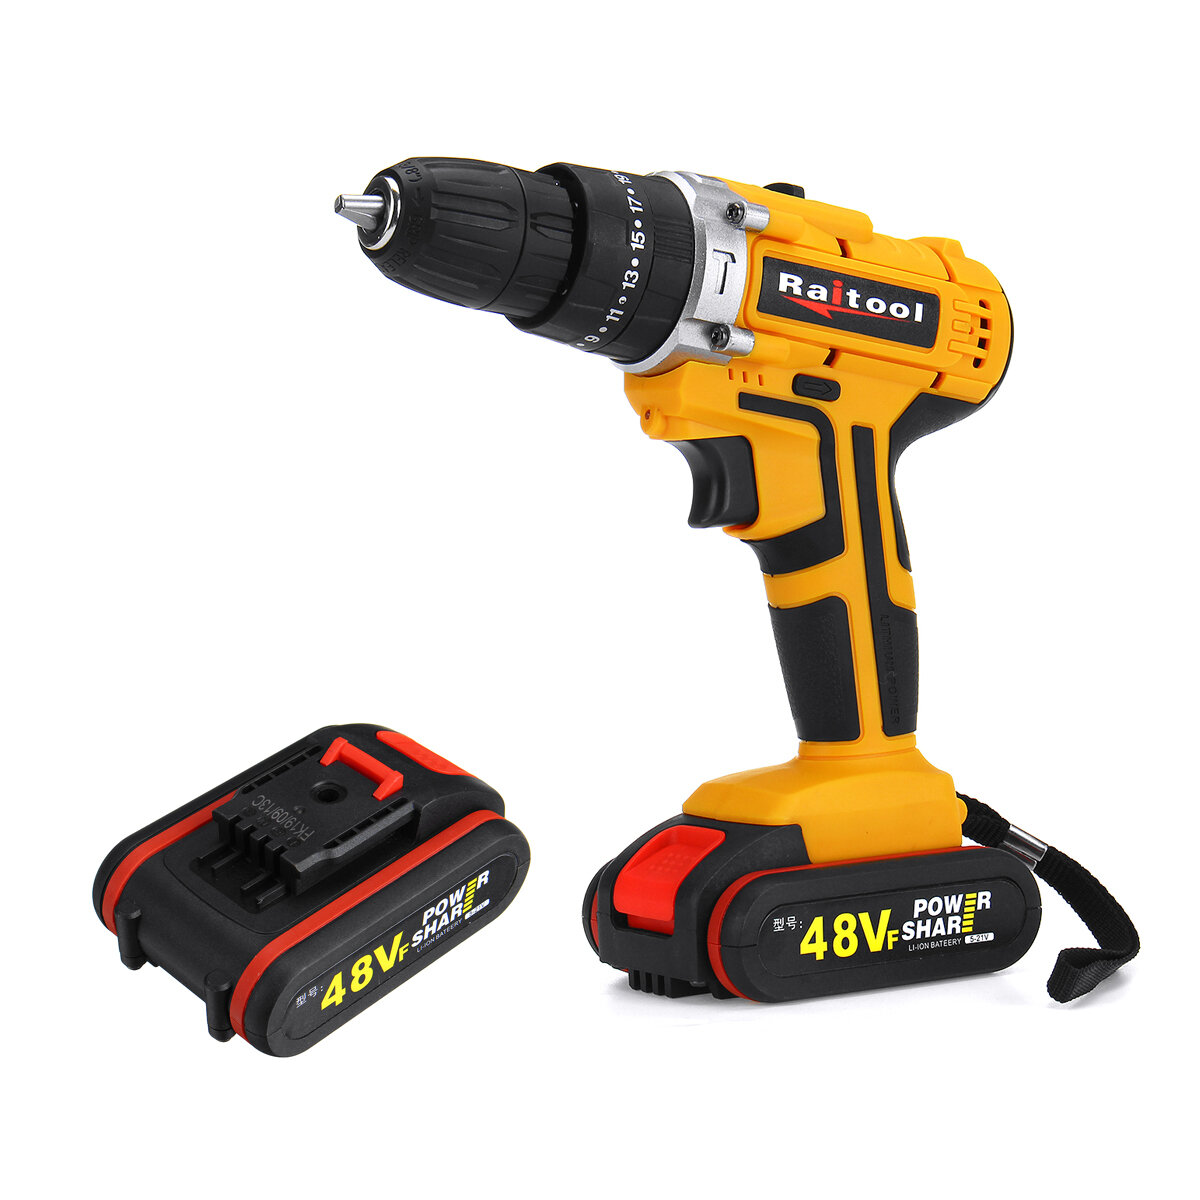 Image of Raitool 48VF Cordless Electric Impact Drill Rechargeable 3/8 inch Drill Screwdriver W/ 1 or 2 Li-ion Battery